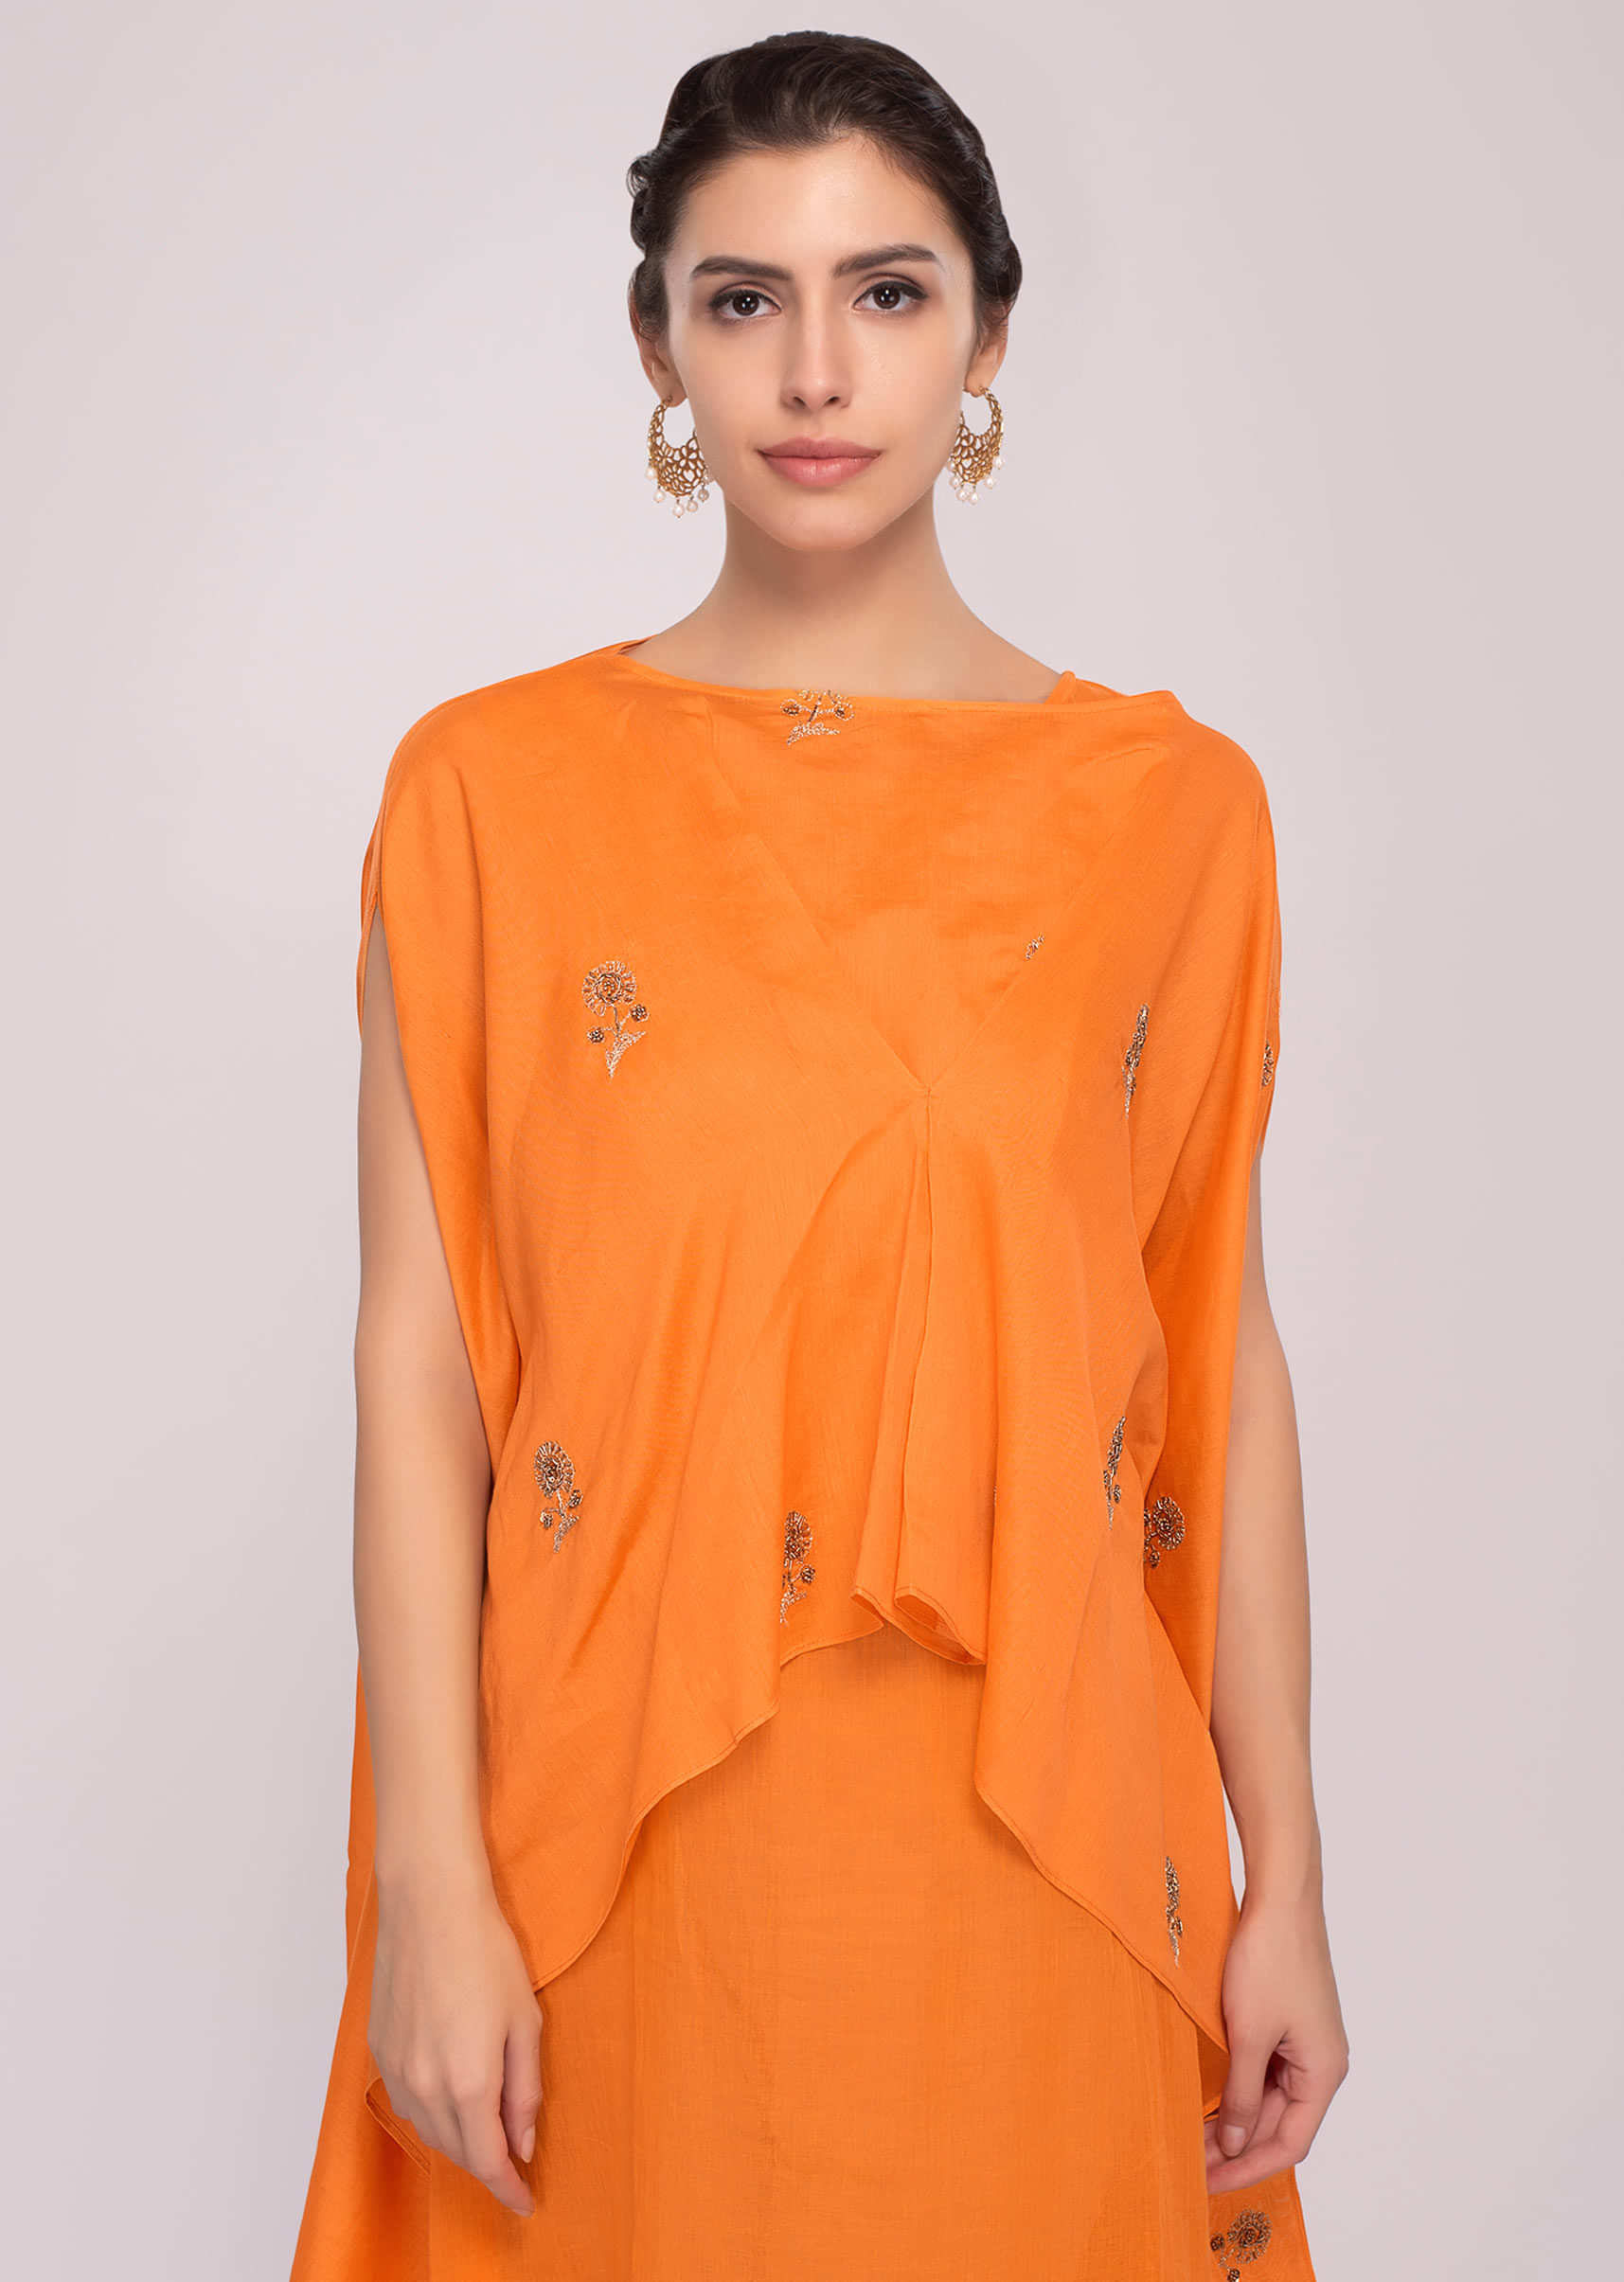 Tangerine orange cotton kurti with over lay fancy jacket in butti